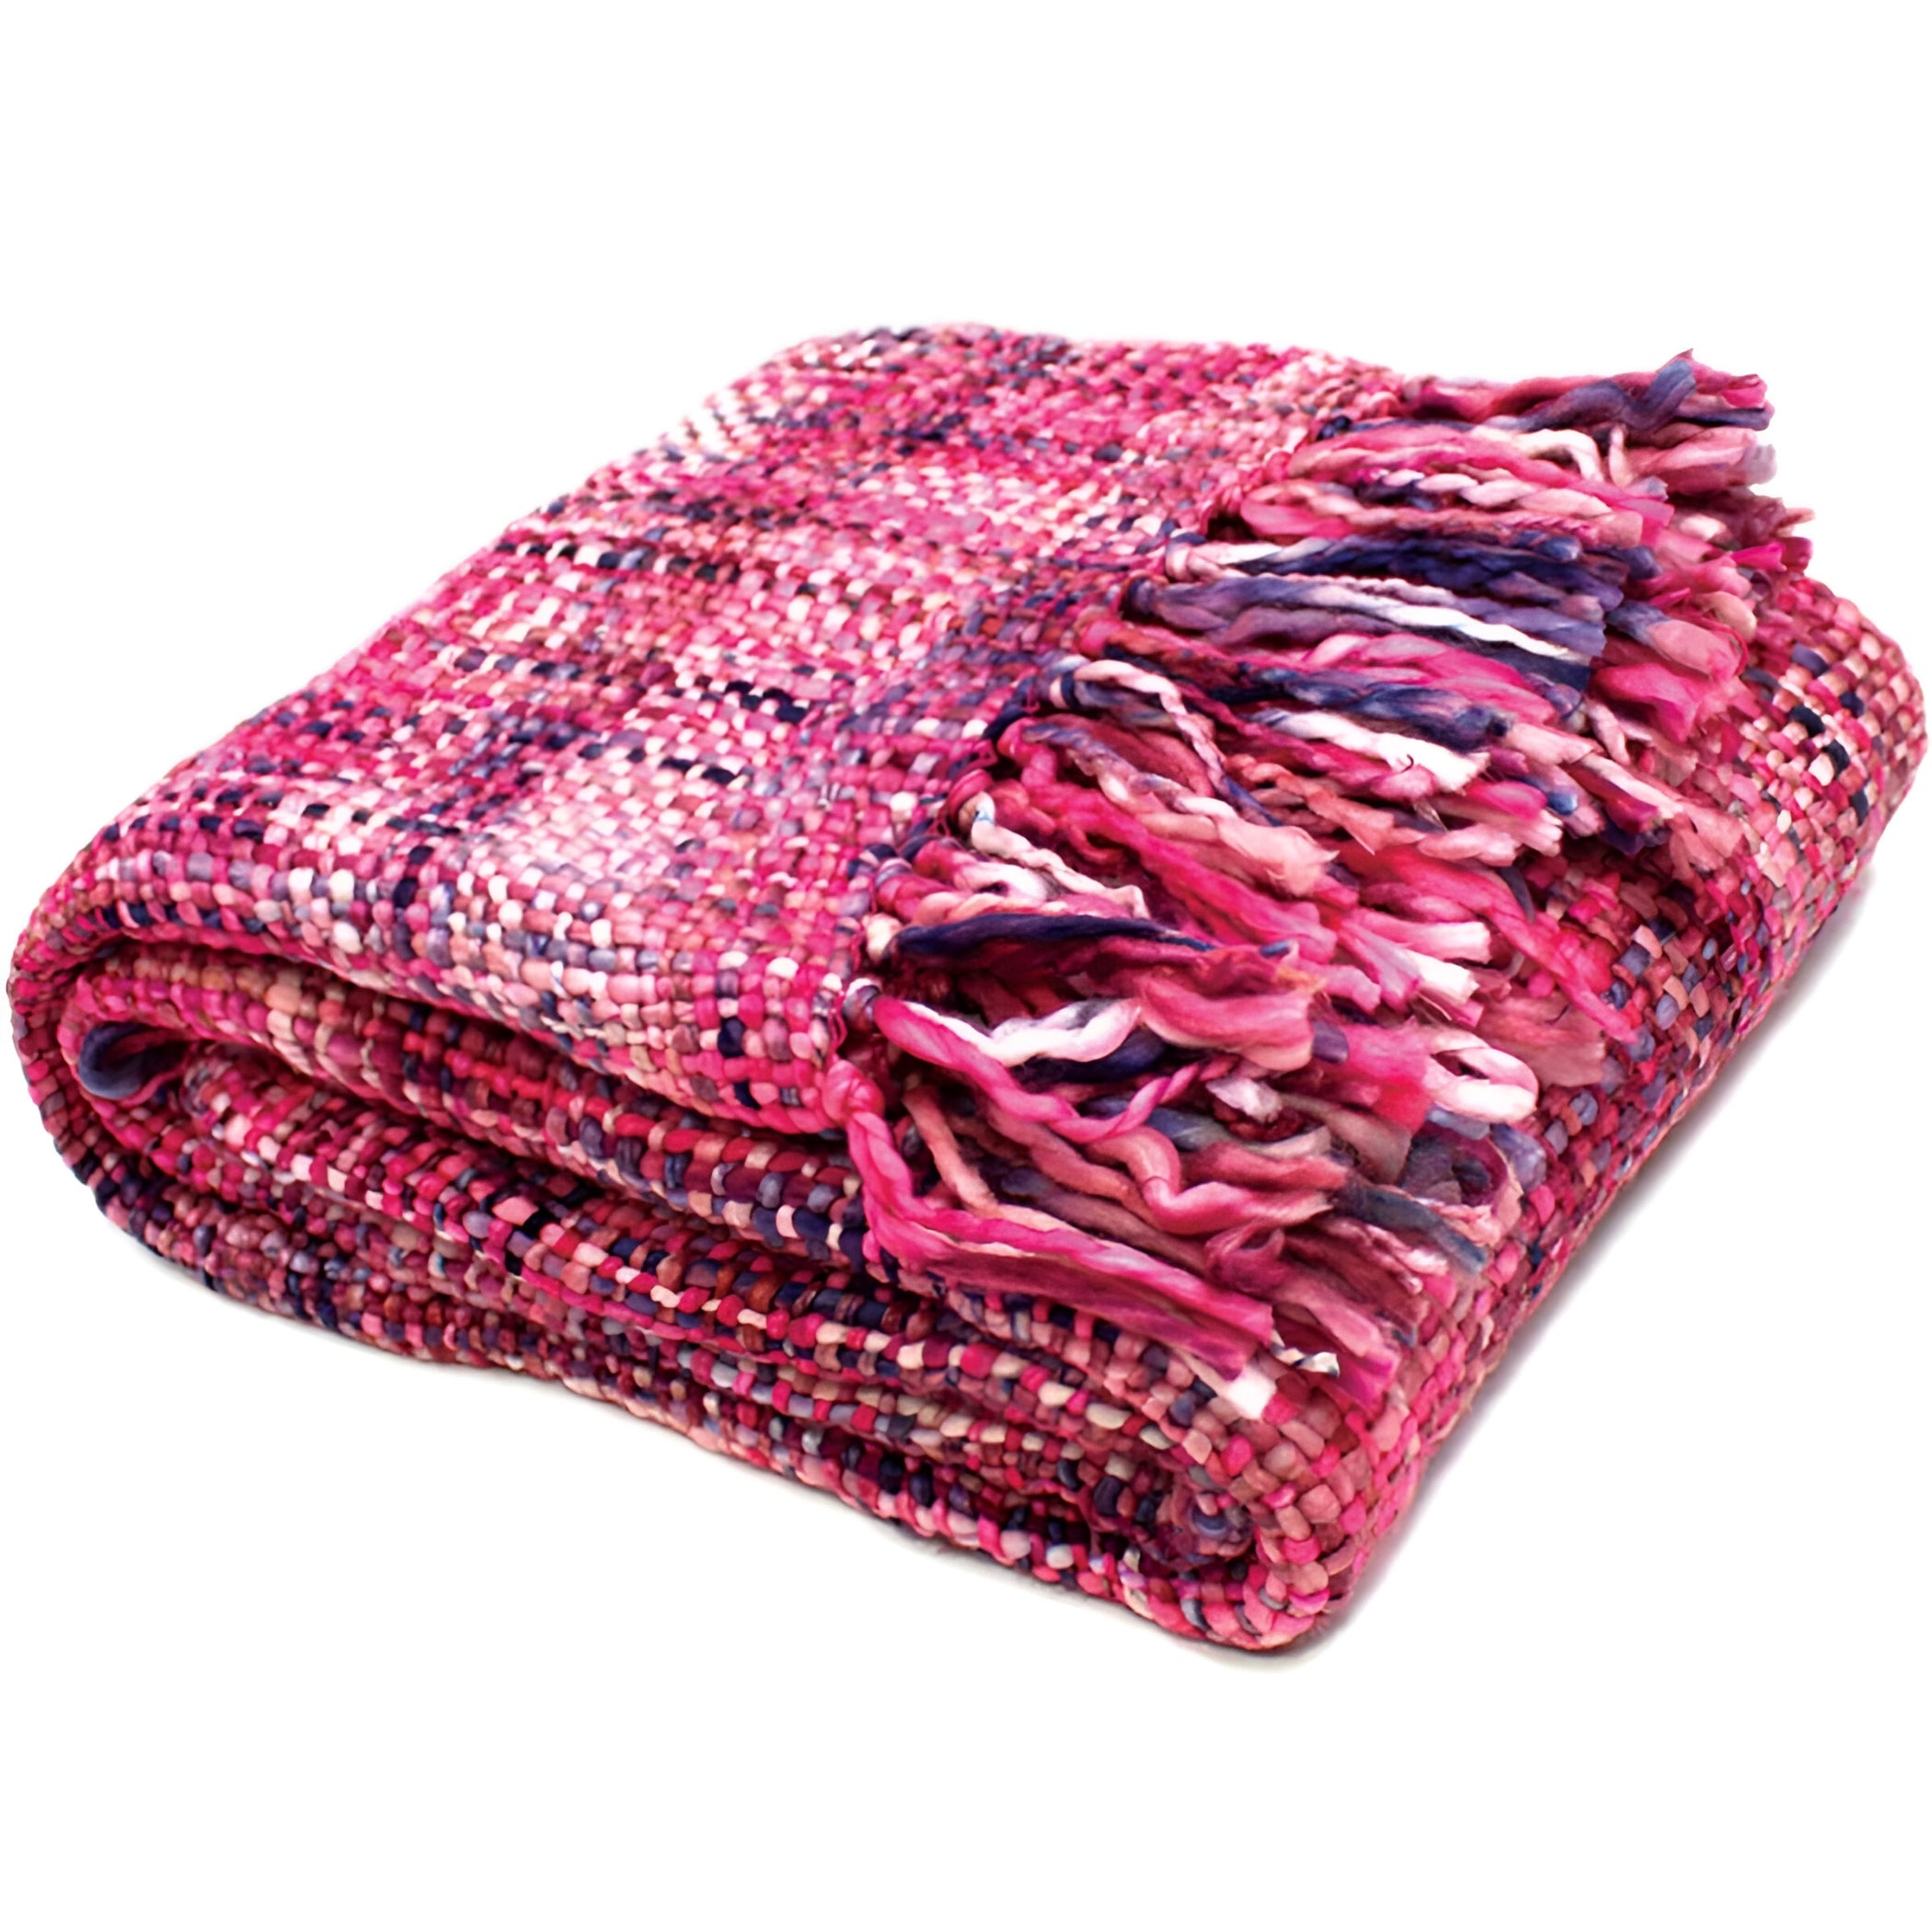 Quinn Knitted Weave Throw in Barbie Doll, folded showcasing the vibrant pink and purple hues with white accents.